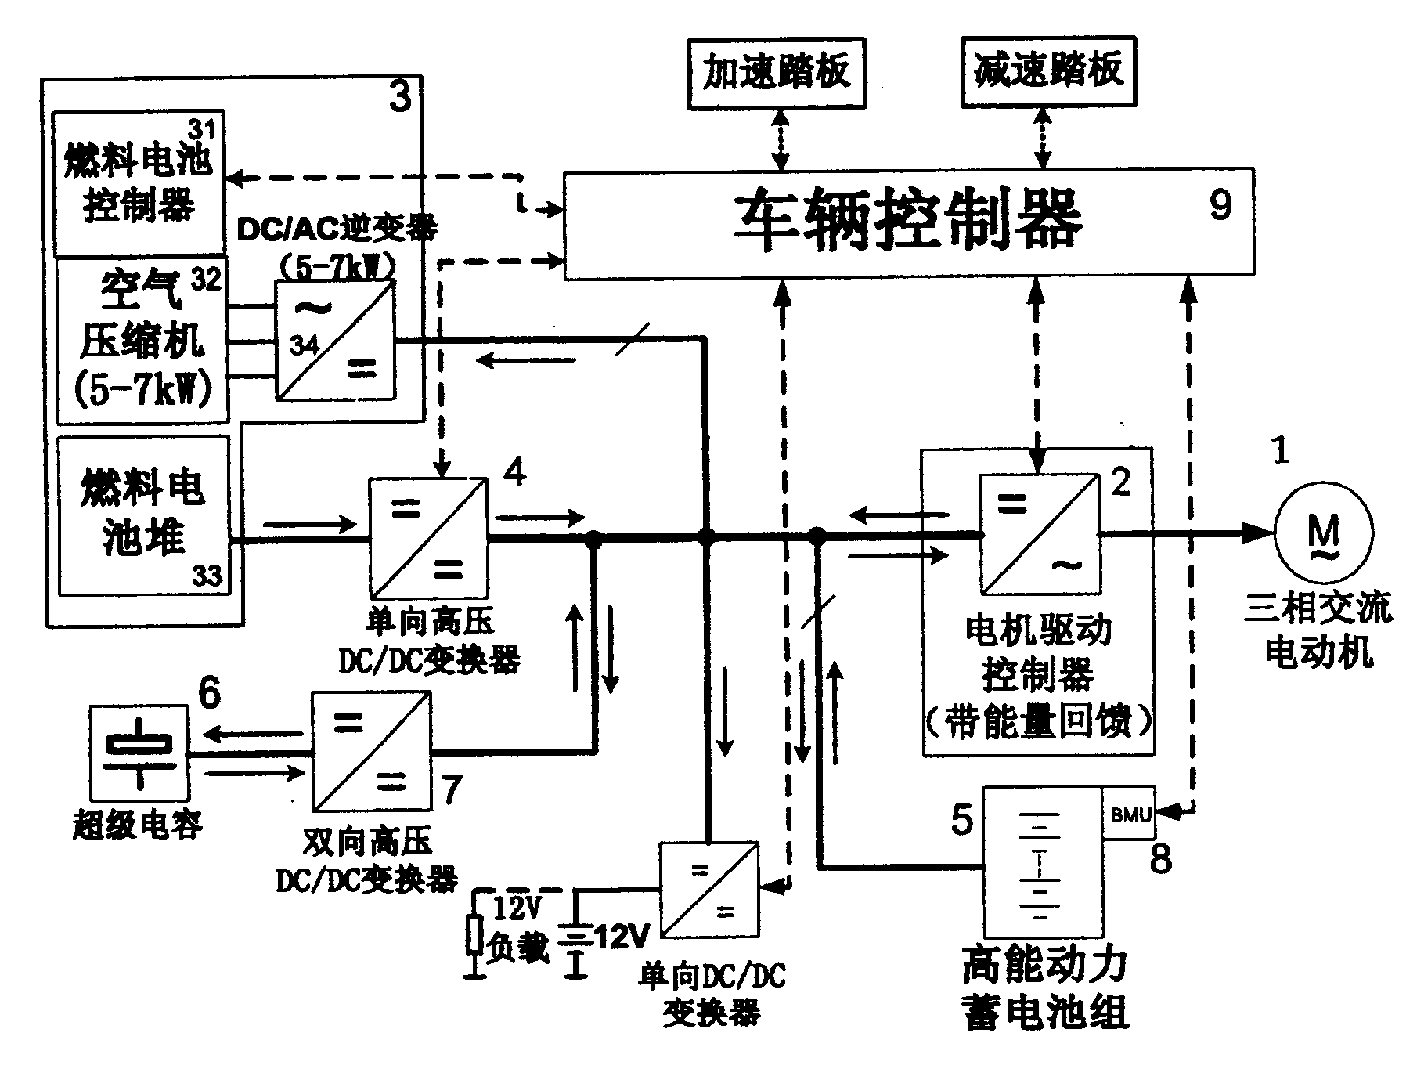 Power system of electric-electric mixed fuel battery automobile